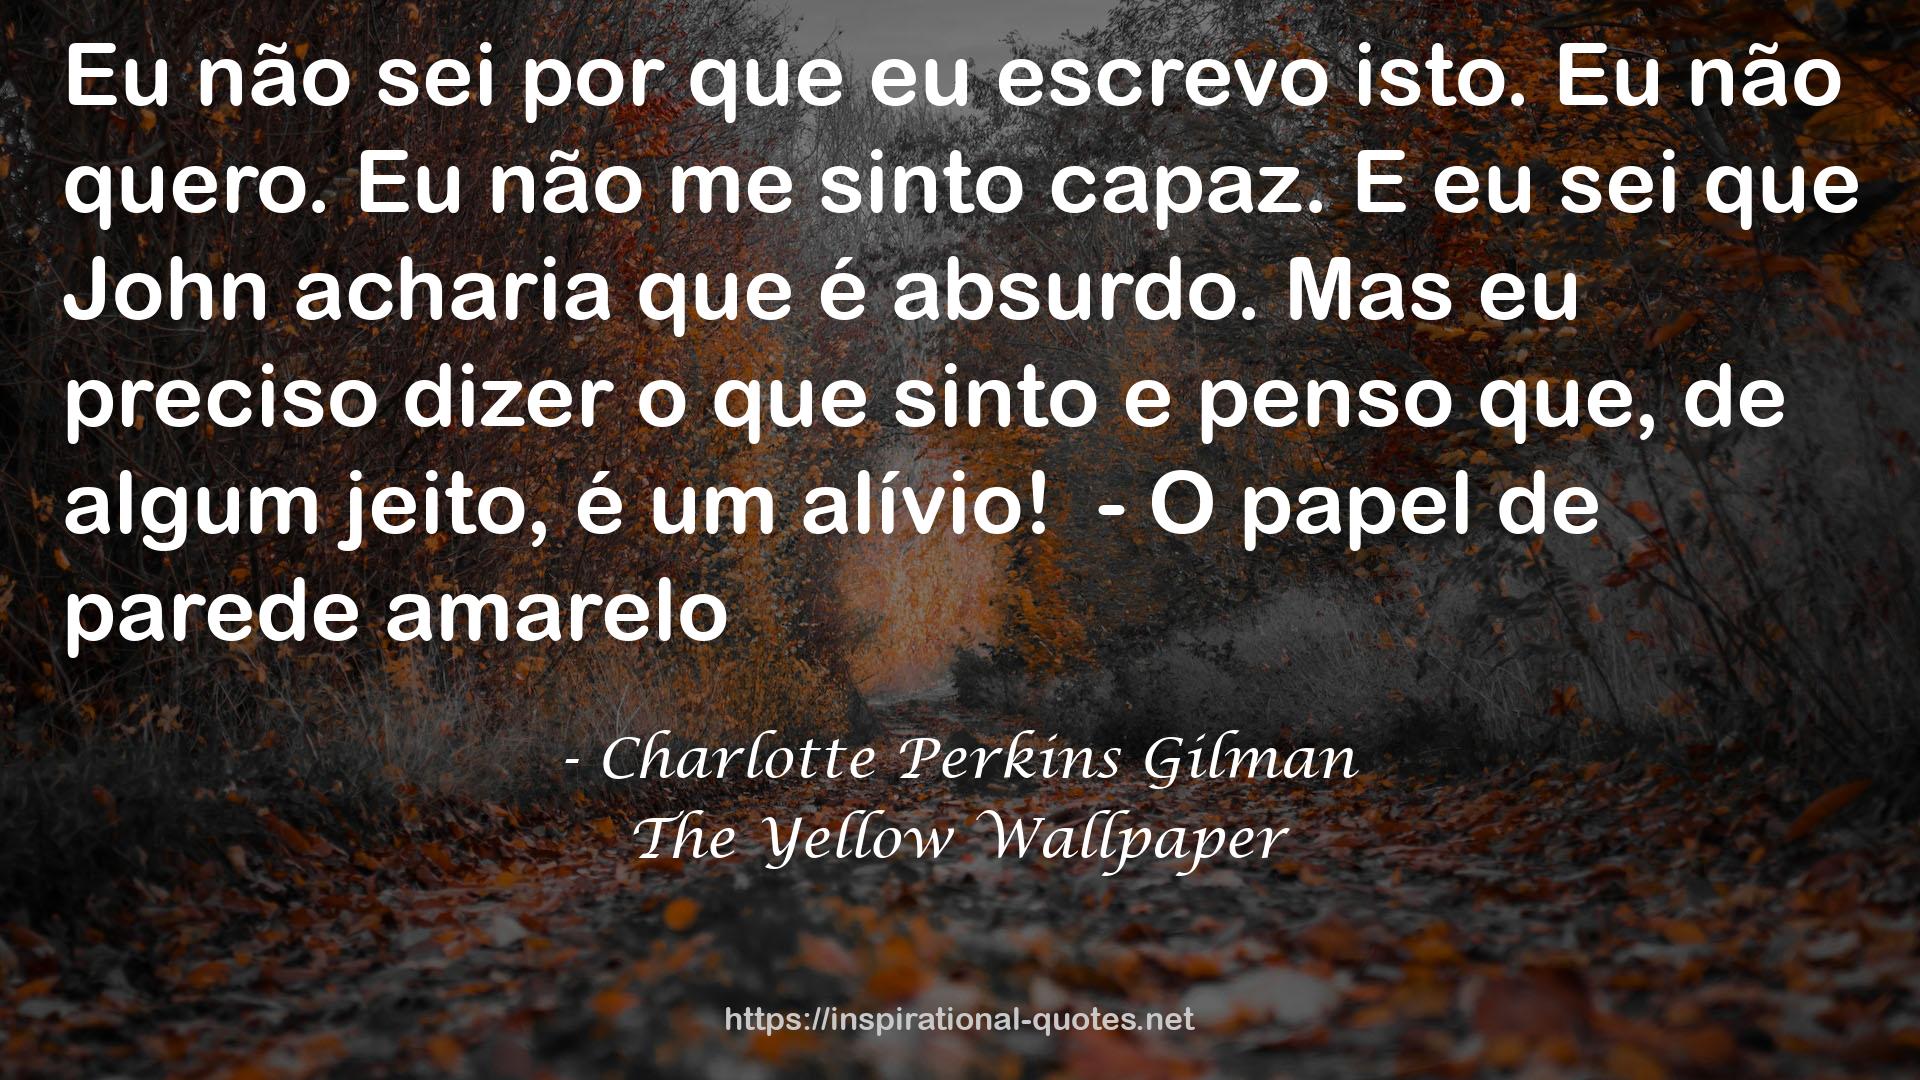 The Yellow Wallpaper QUOTES